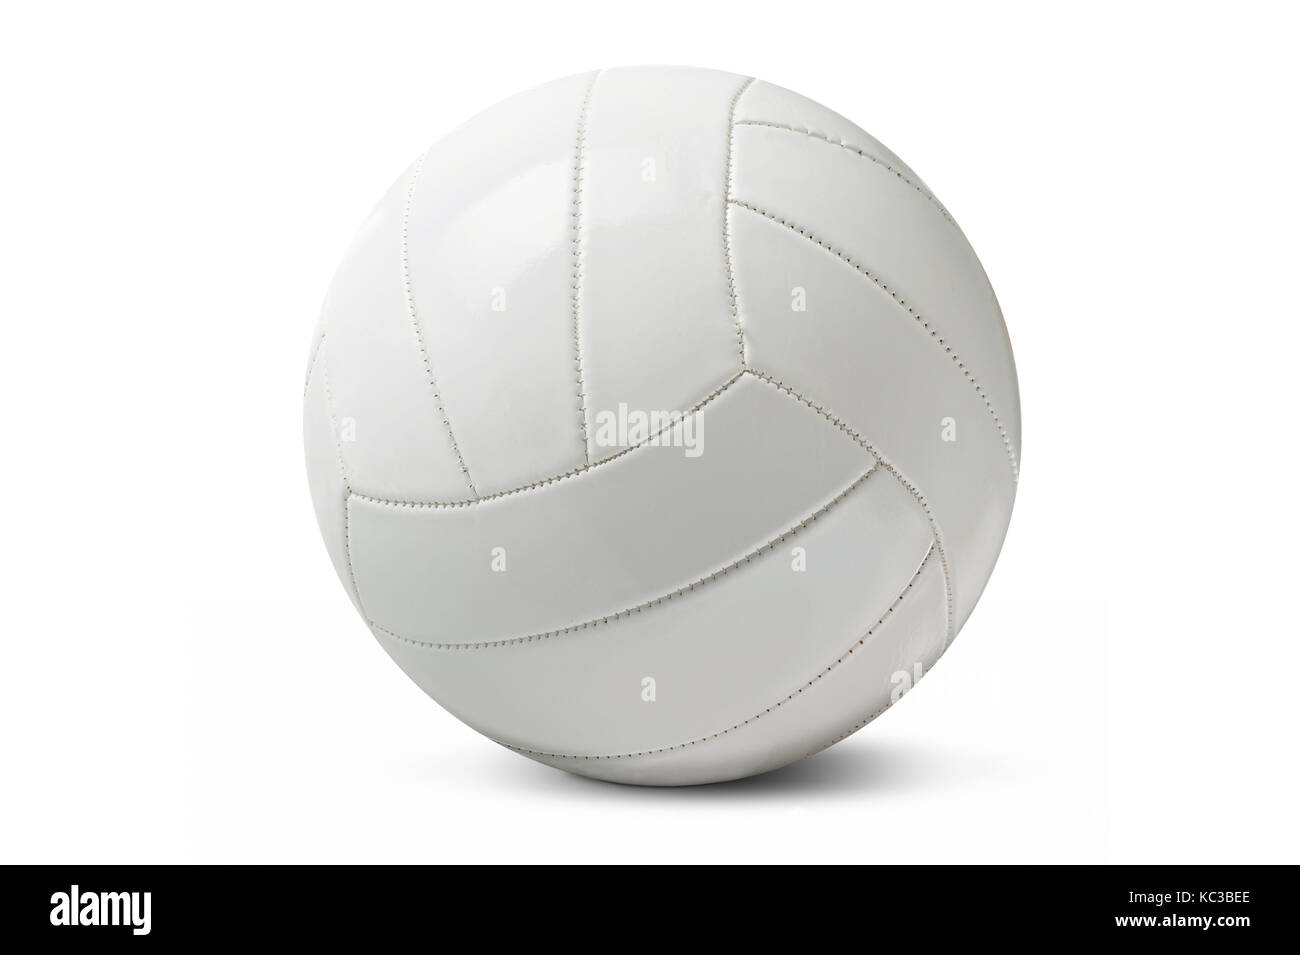 Pro Beach Volleyball High Resolution Stock Photography and Images - Alamy